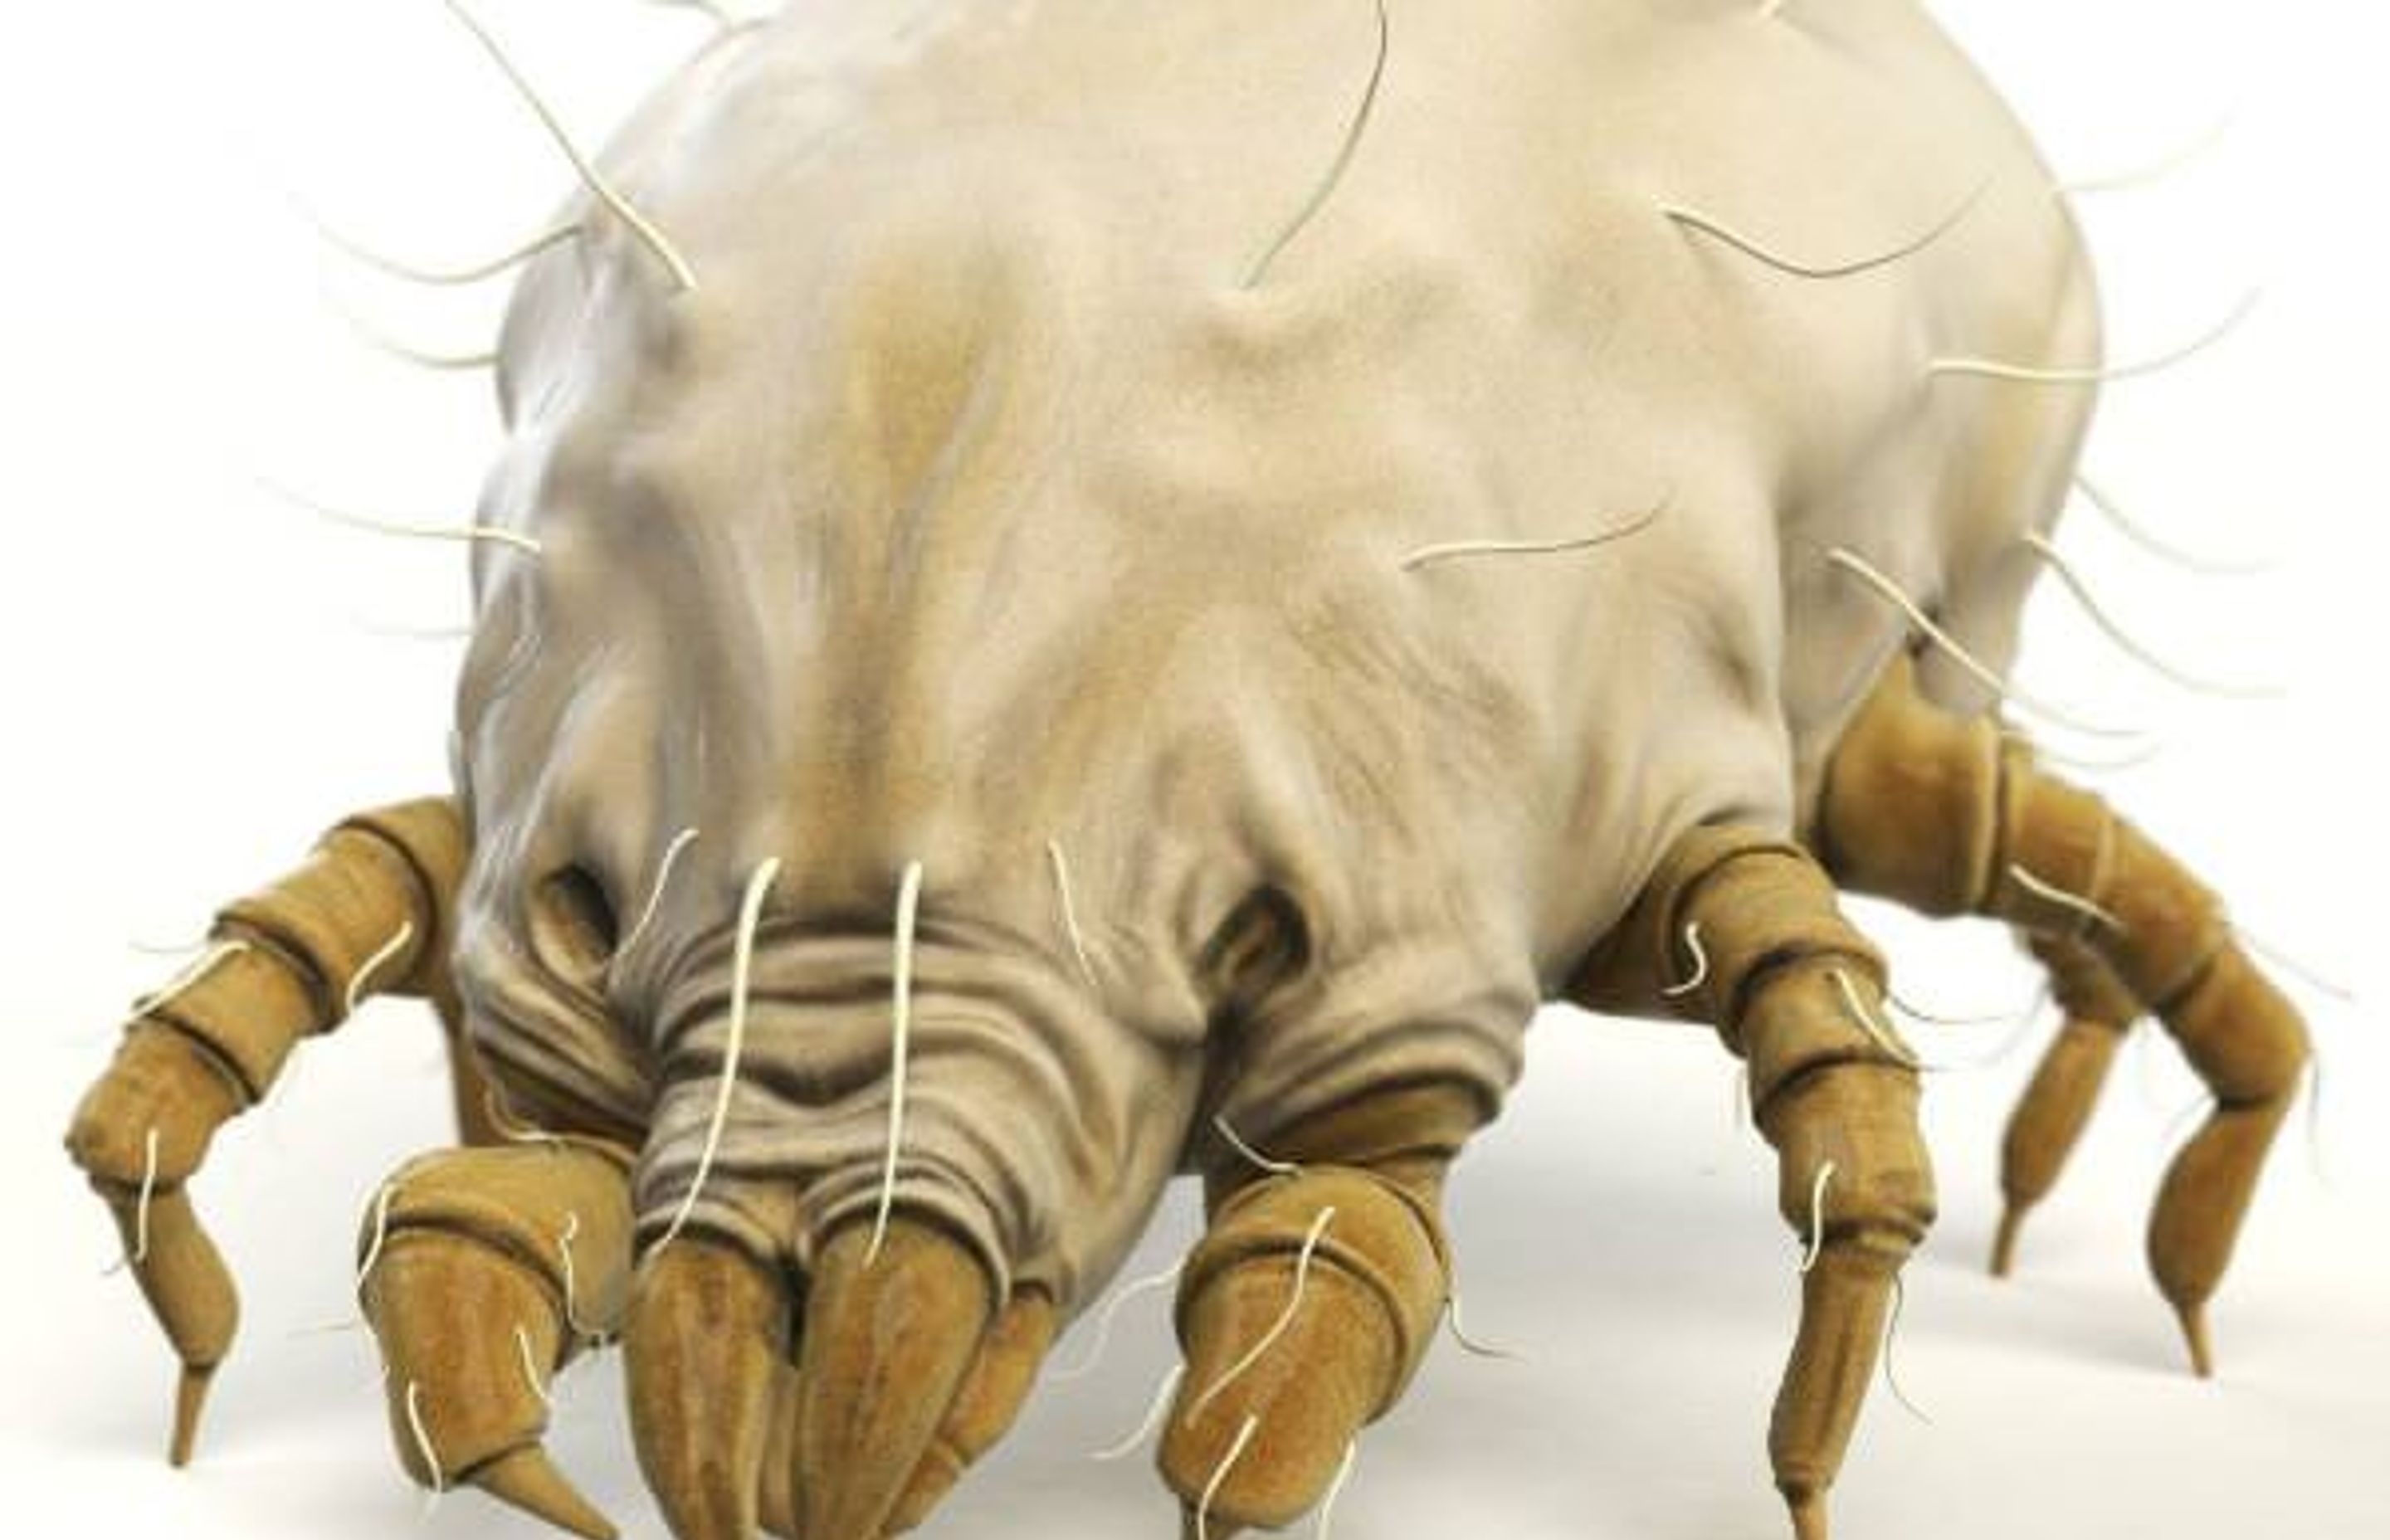 That is a scary picture of a Dust mite! Our homes are teeming with dust mites, which are the likely source of many allergies.